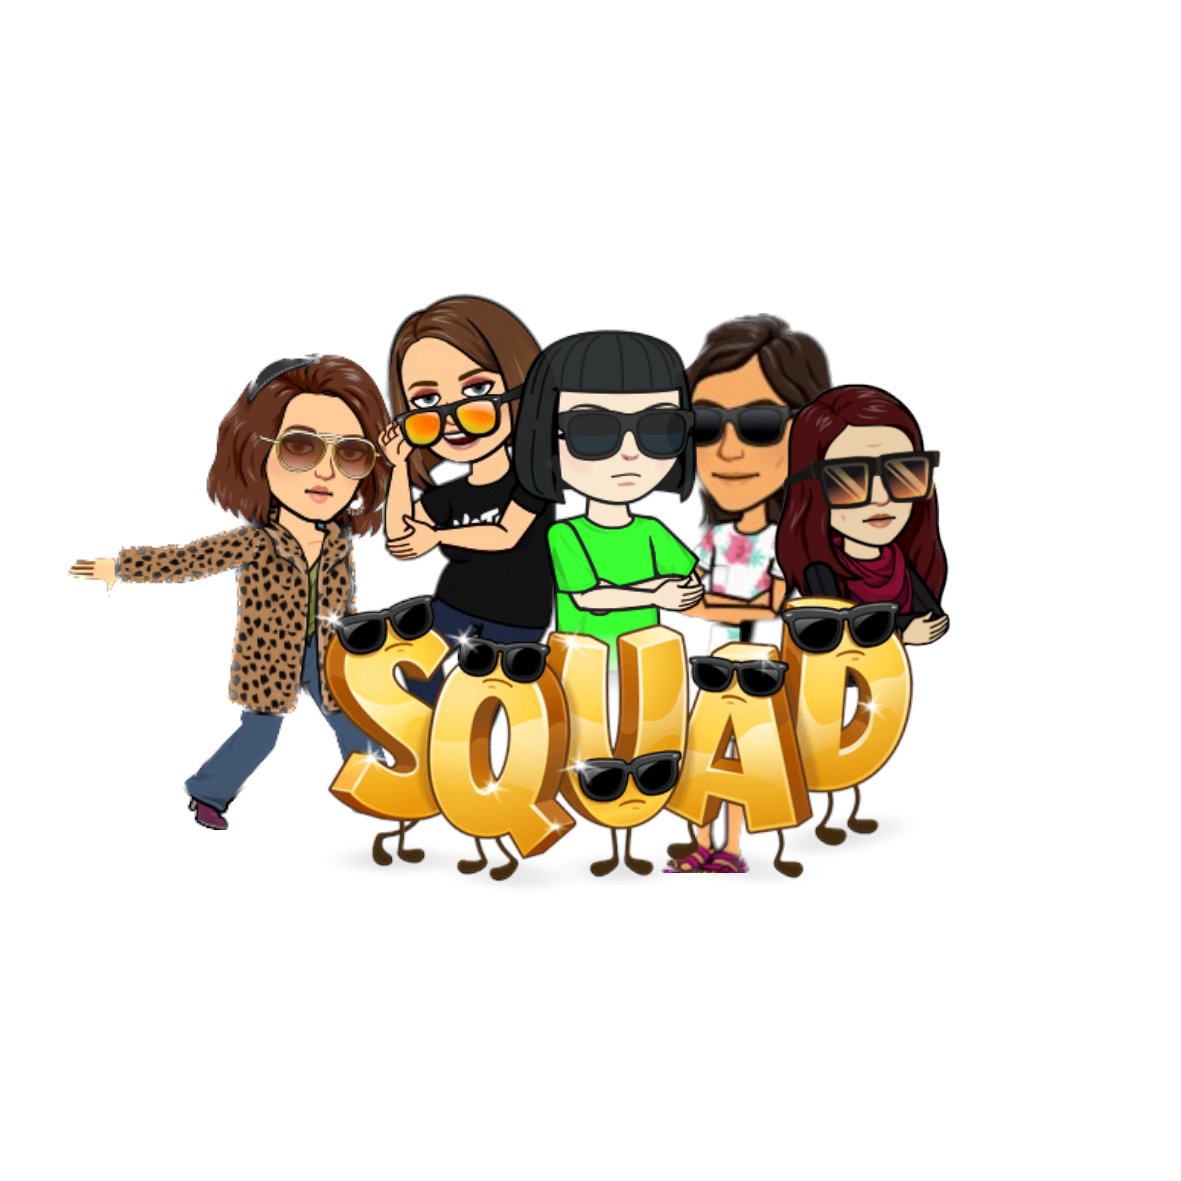 A5 #sschat 🗺️ my historical road trip partners are Sacajawea, Amelia Earhart and Gladys West - all trailblazers/explorers/way finders/navigators and Bada$$ women! Just like my squad now!